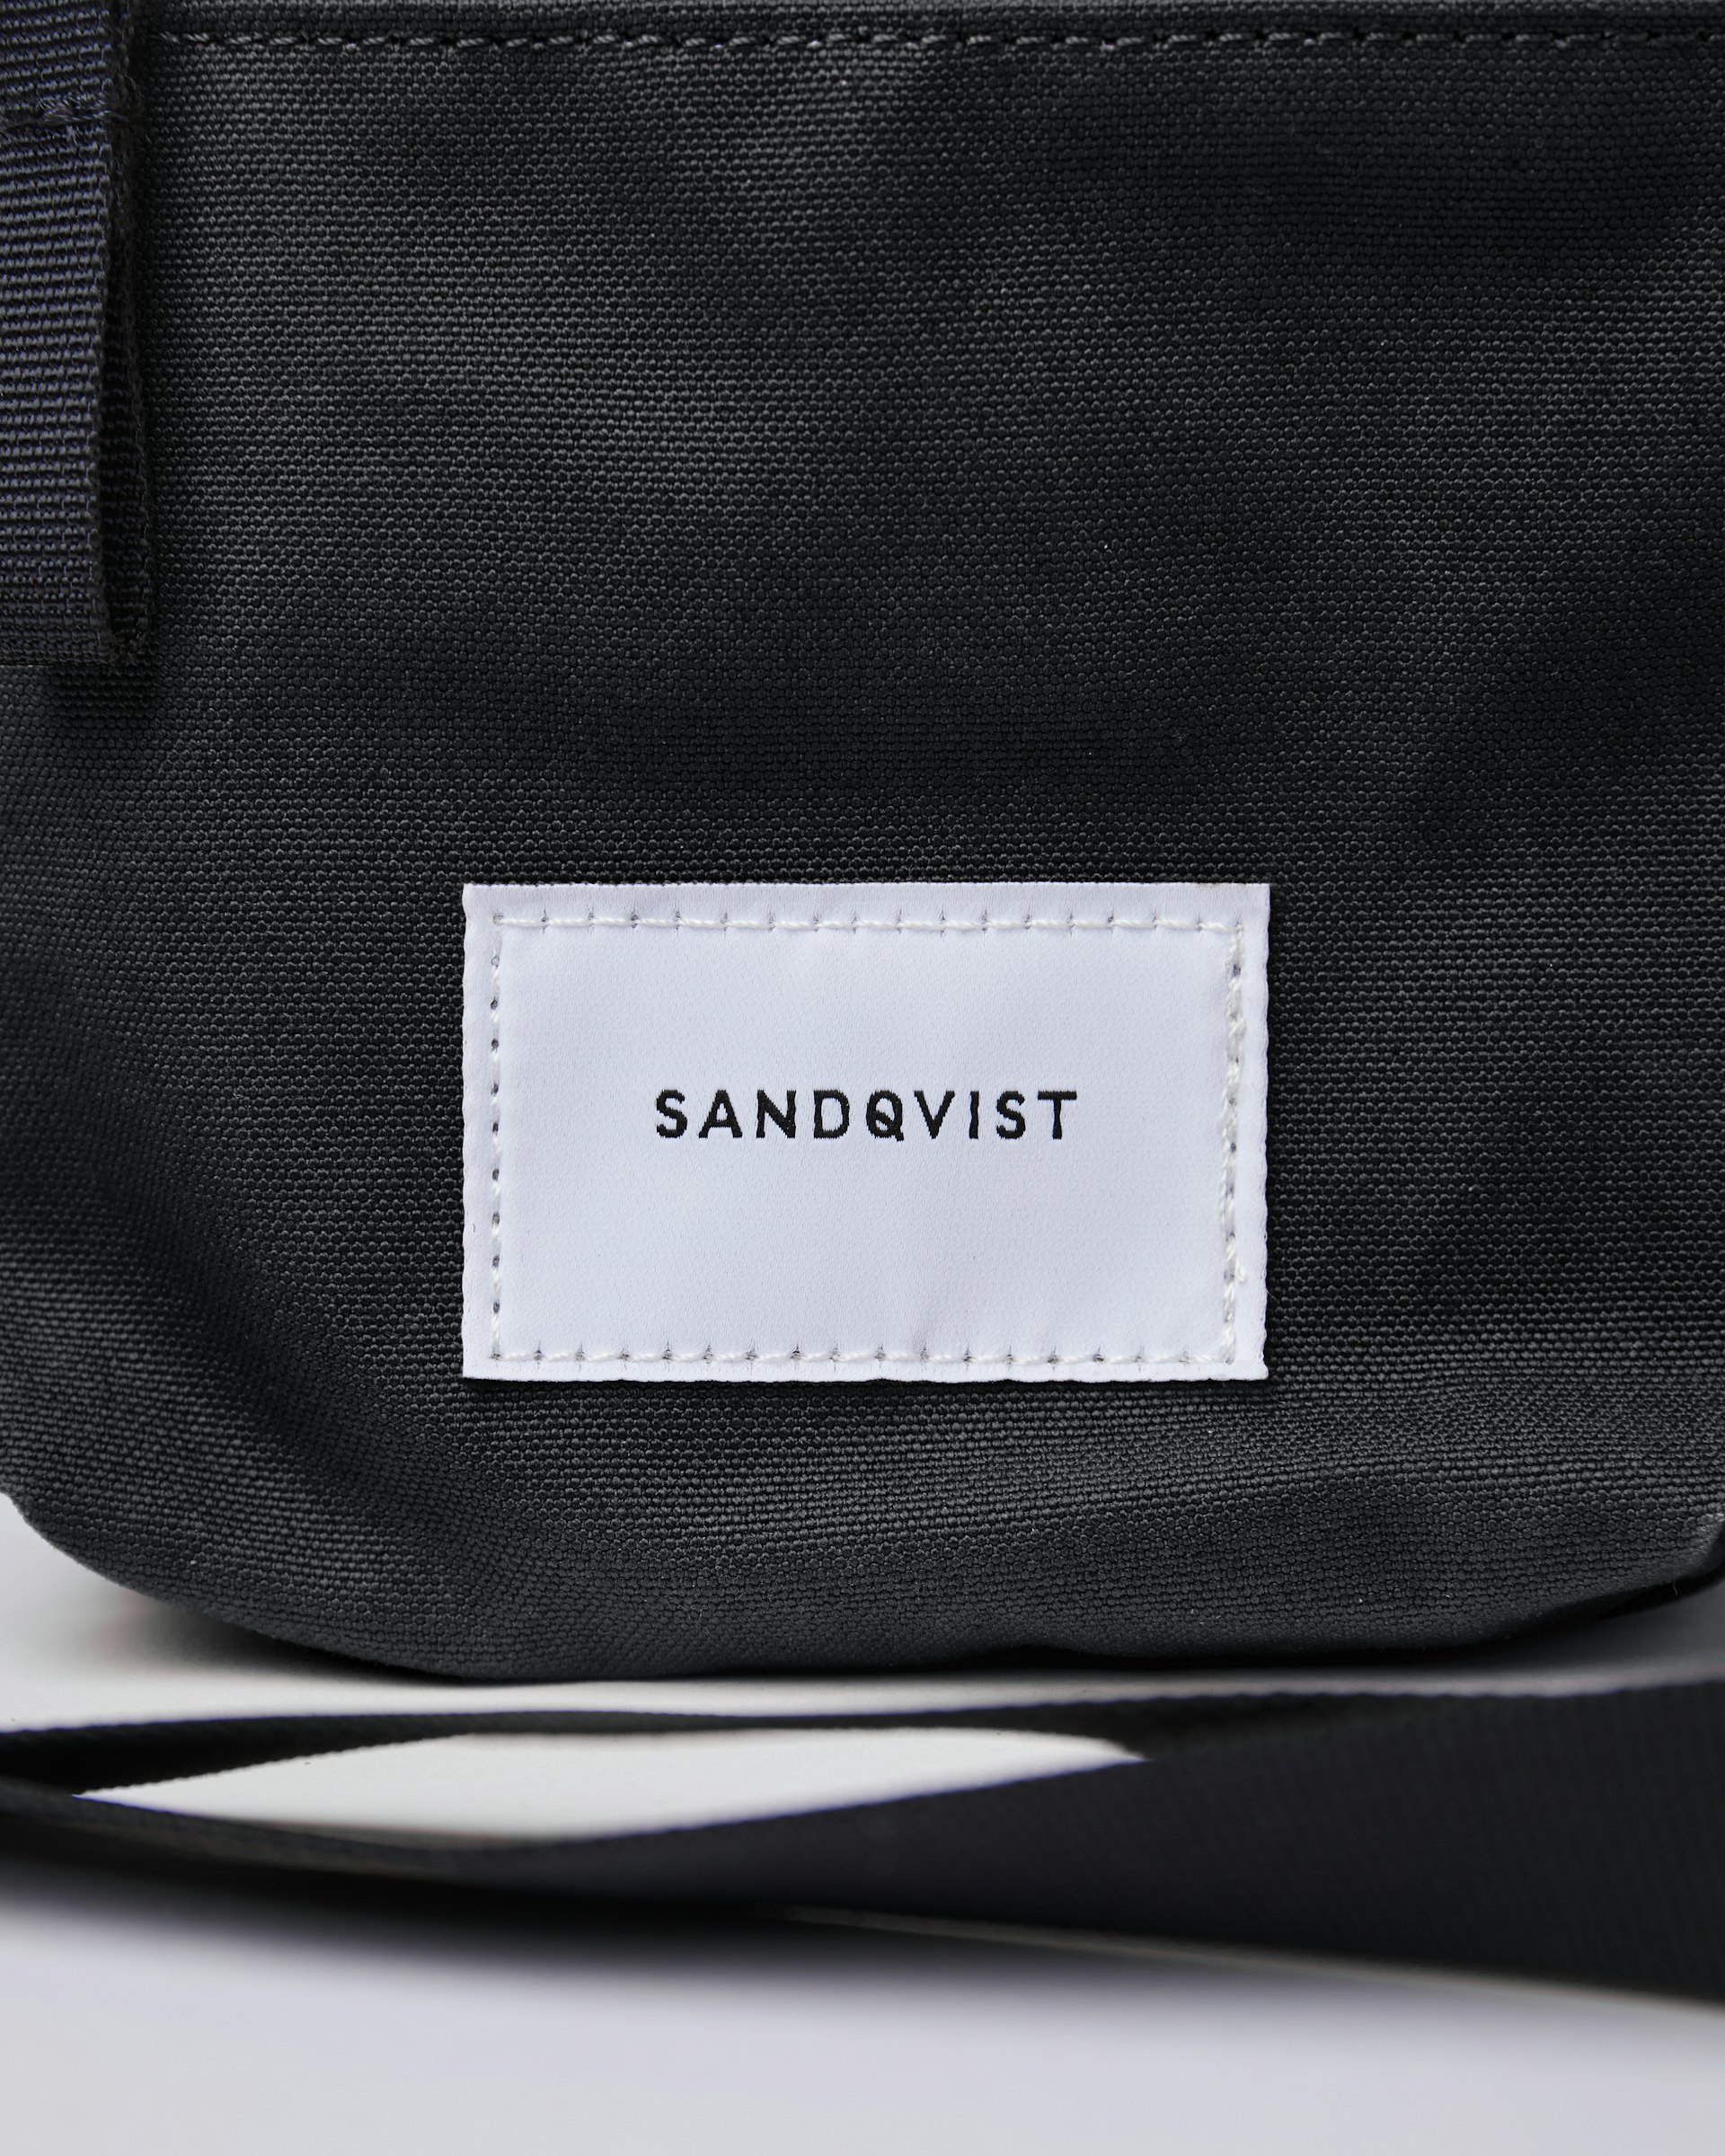 Sixten Vegan Black belongs to the category Shoulder bags and is in color black (2 of 4)